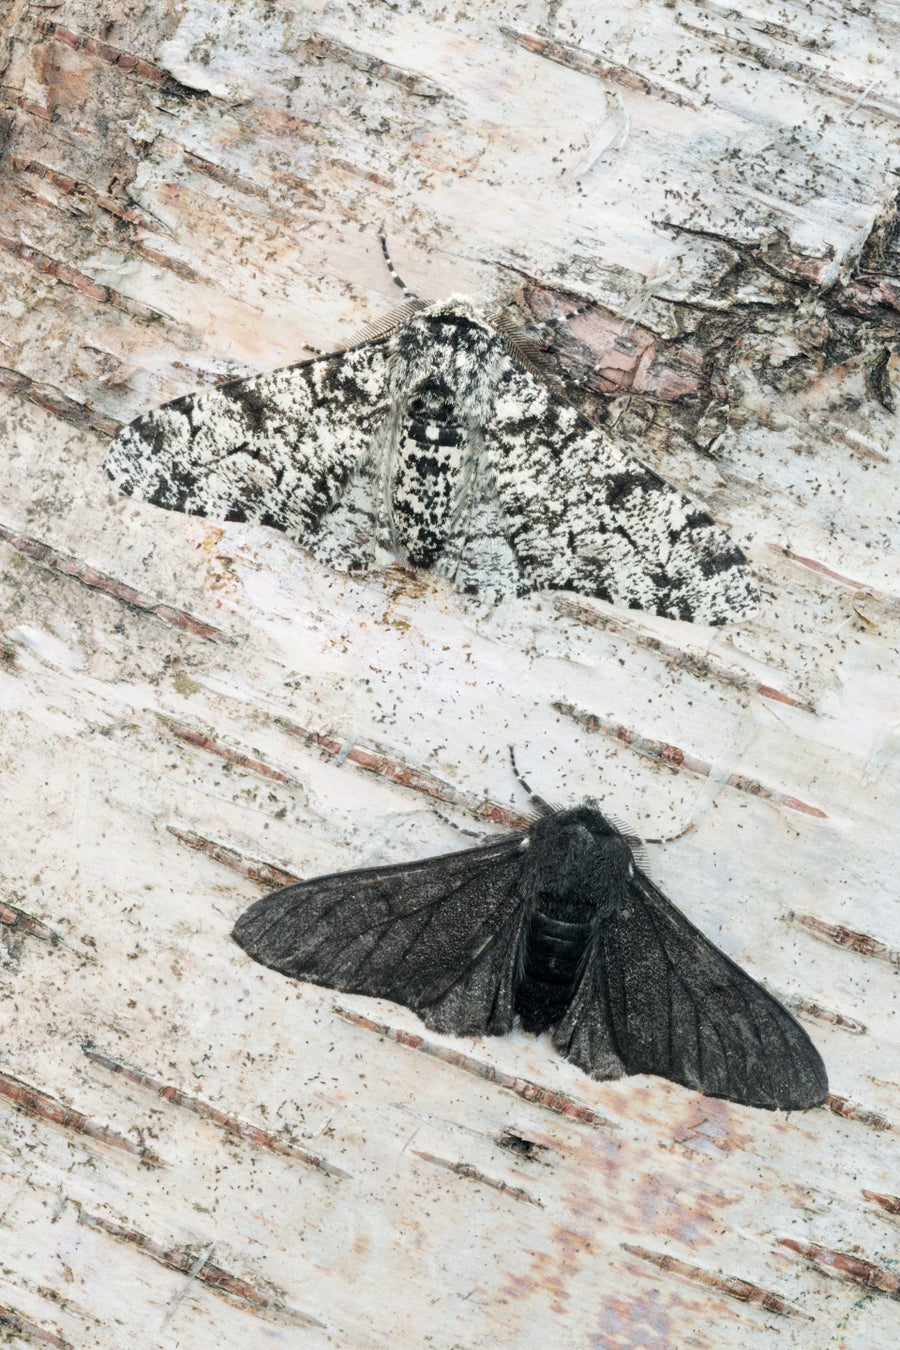 Image of a peppered moth.